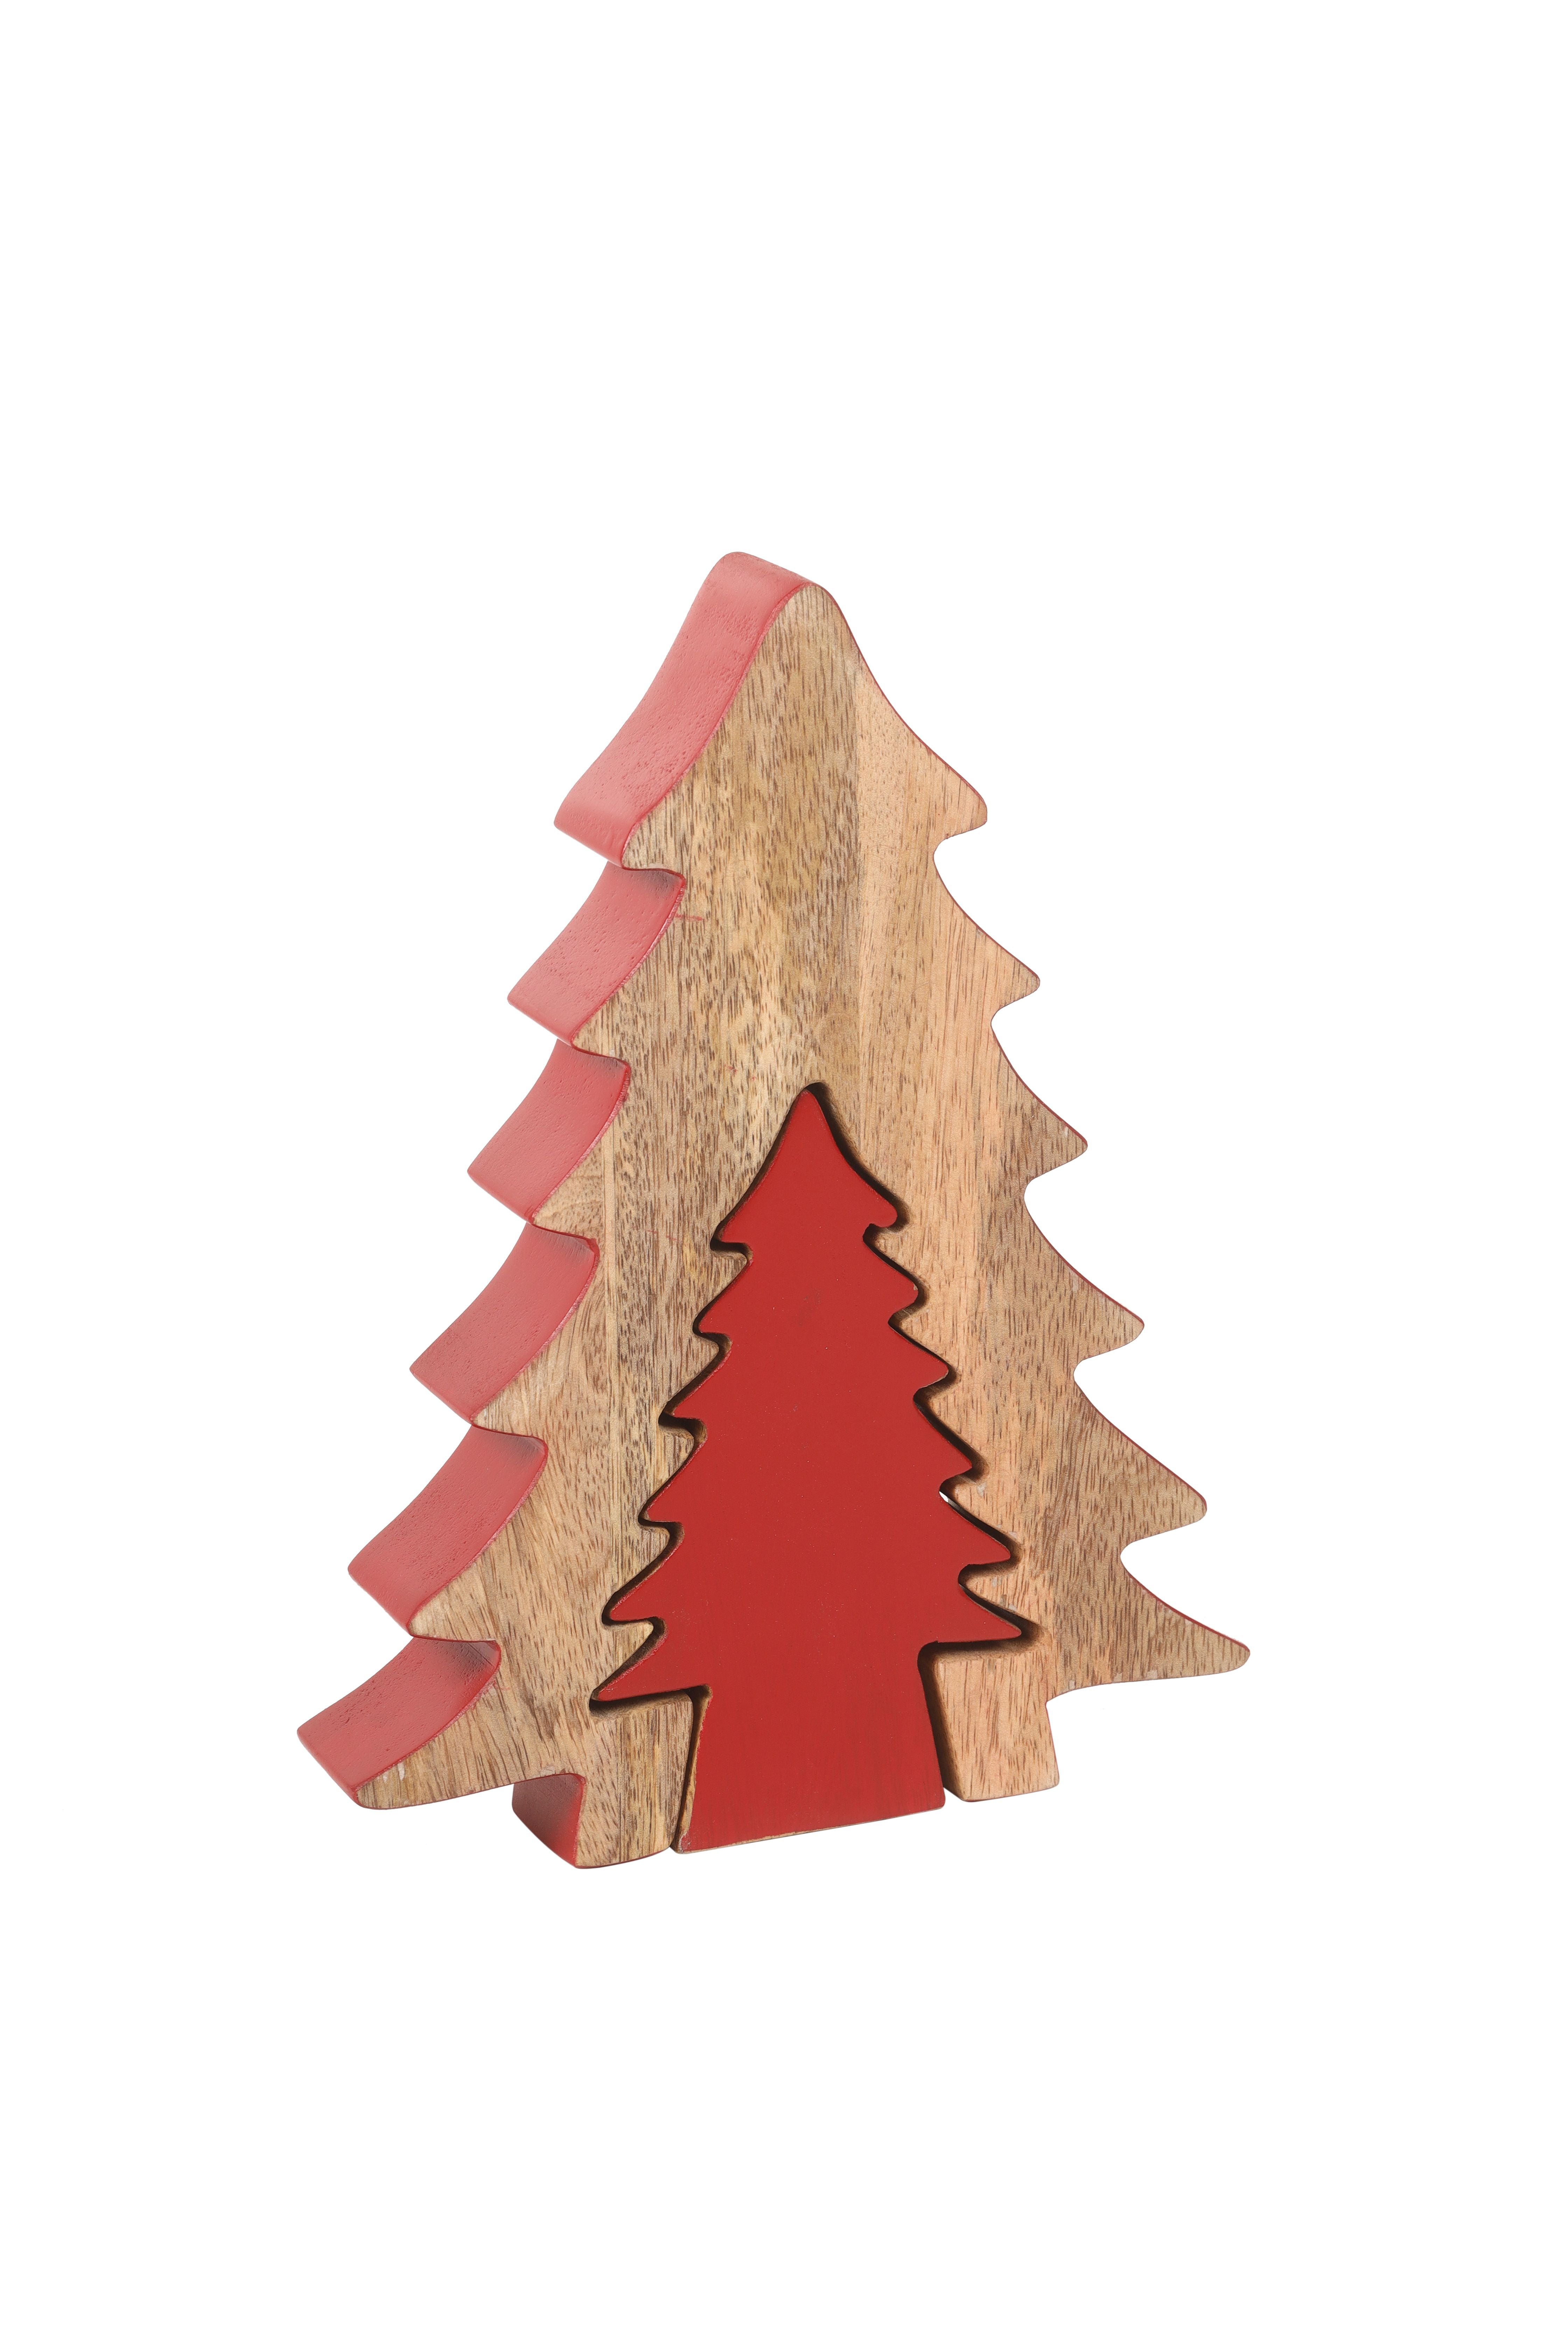 3D Wooden Tag Christmas Gift Xmas Tree Hanging Home Office Decoration Supplies 